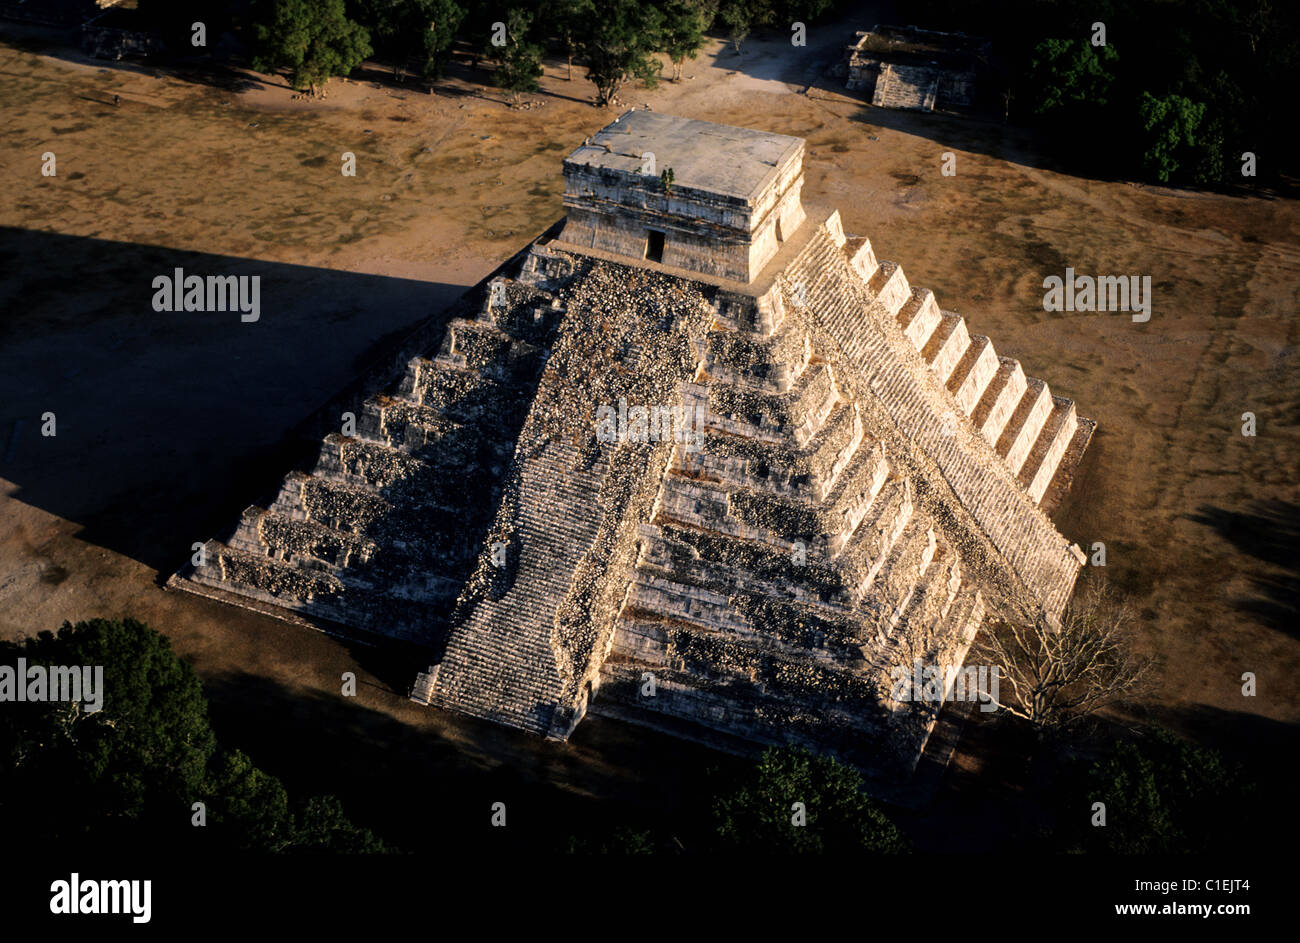 Mexico, Yucatan State, Mayan site of Chichen Itza, the castle or pyramid of Kukulcan (aerial view) Stock Photo